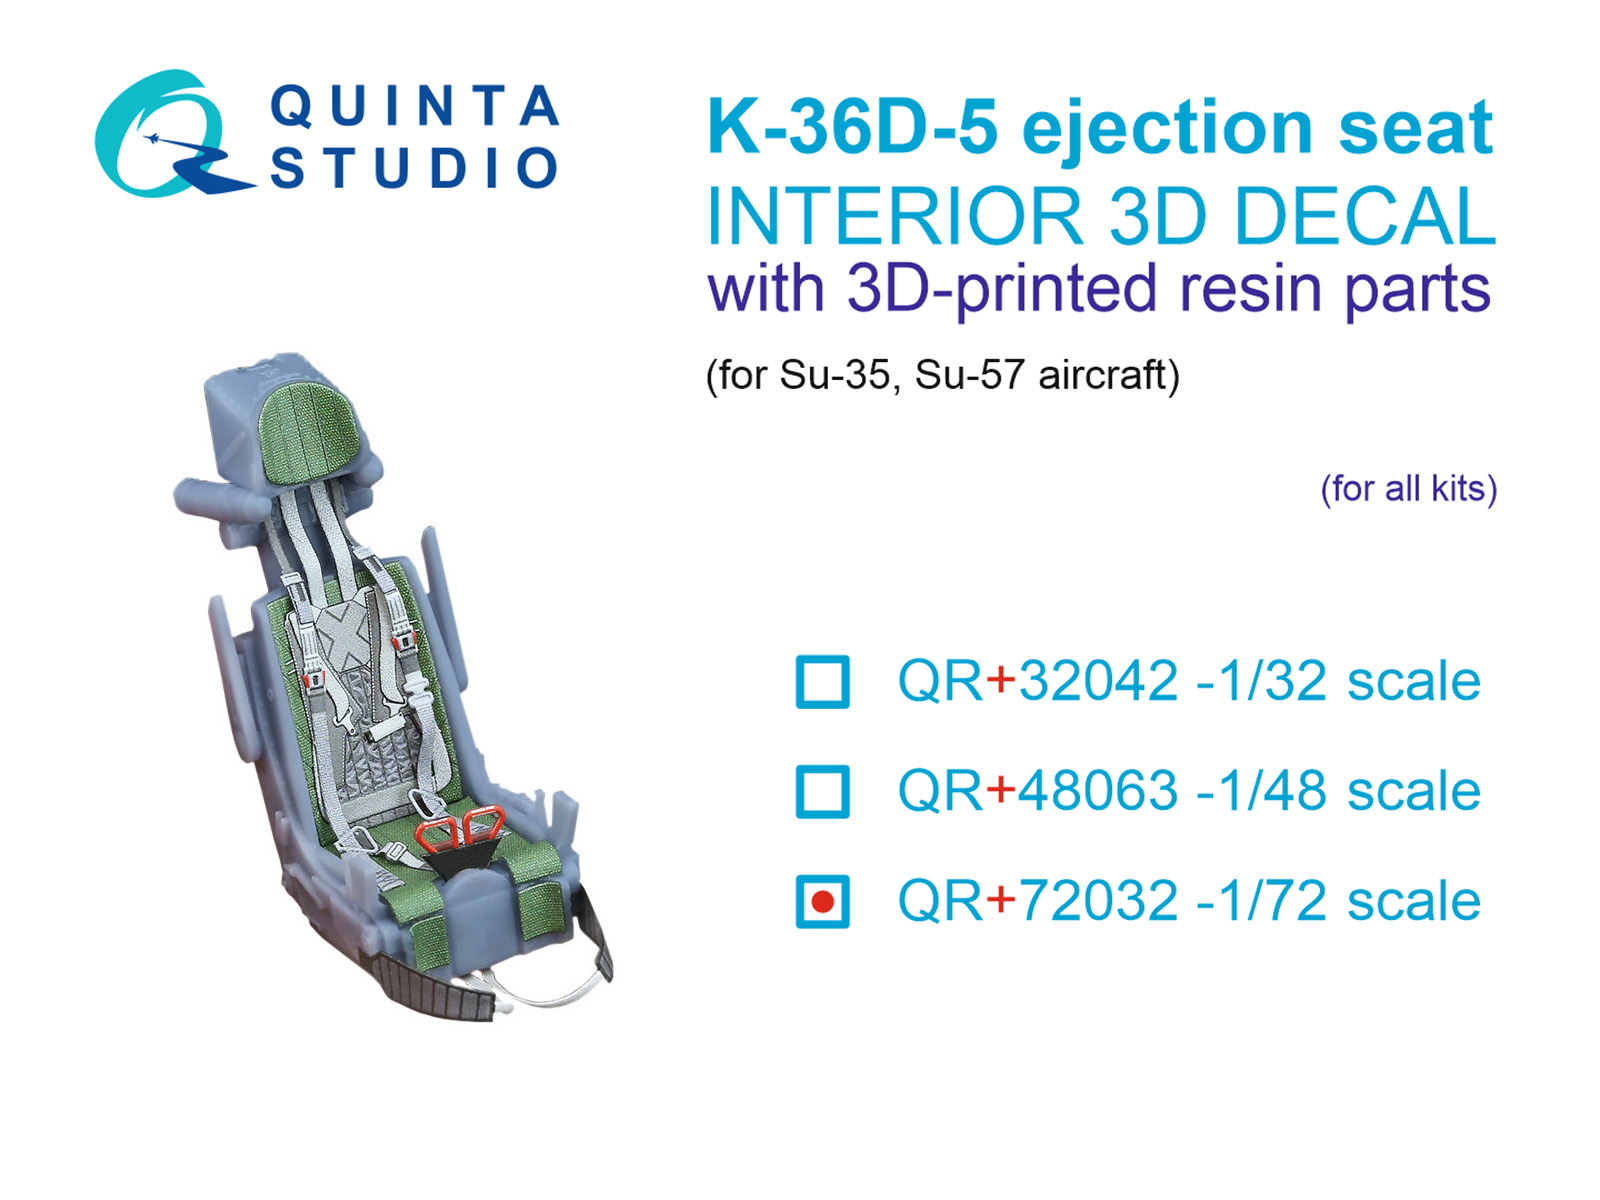 K-36D-5 ejection seat (for Su-35, Su-57 aircraft) (All kits)